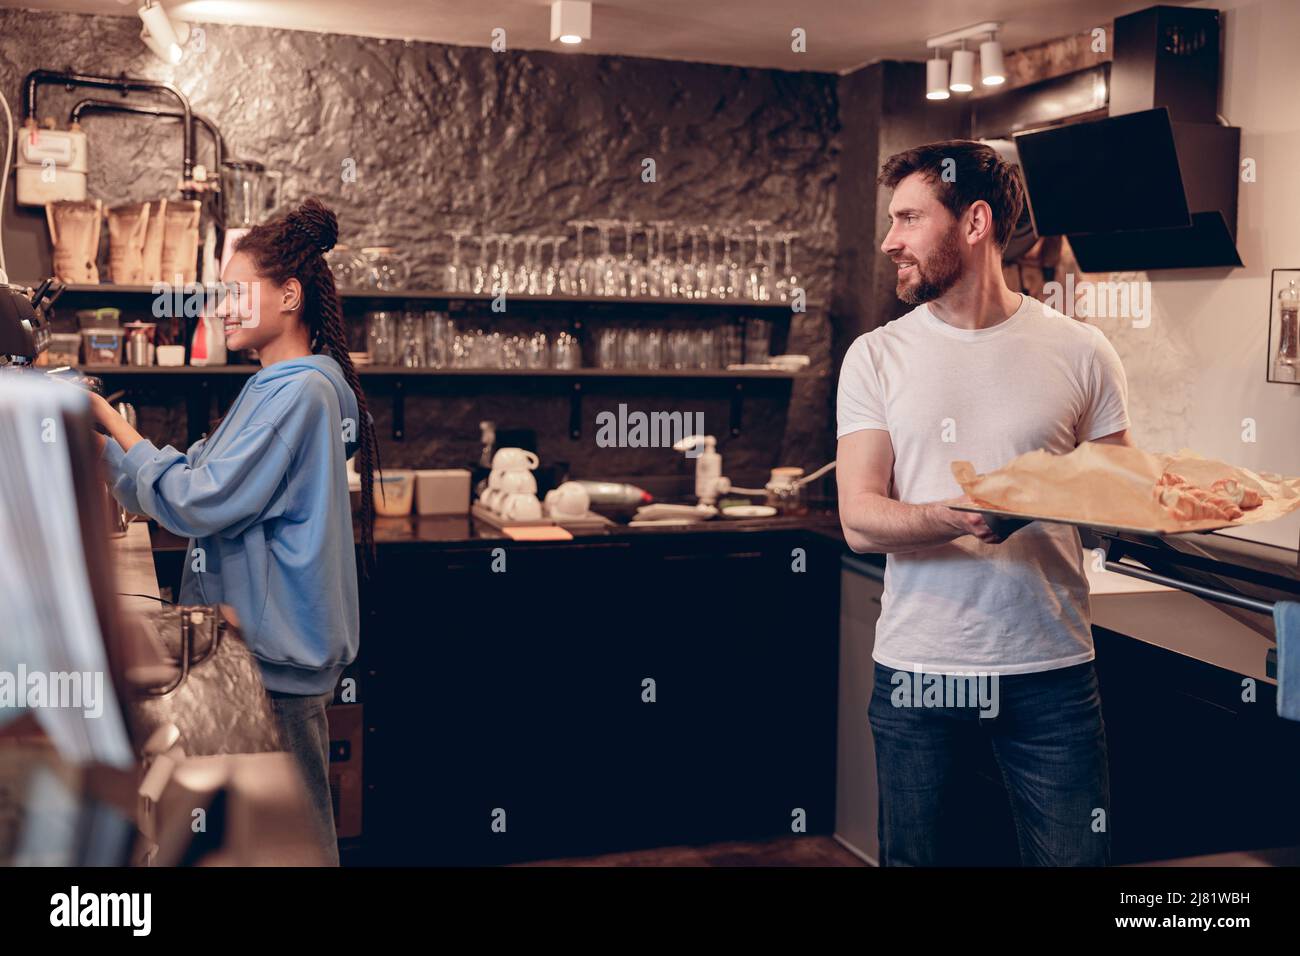 Young cafeteria workers working at bar kitchen. Female making coffee, male baking croissants. Stock Photo